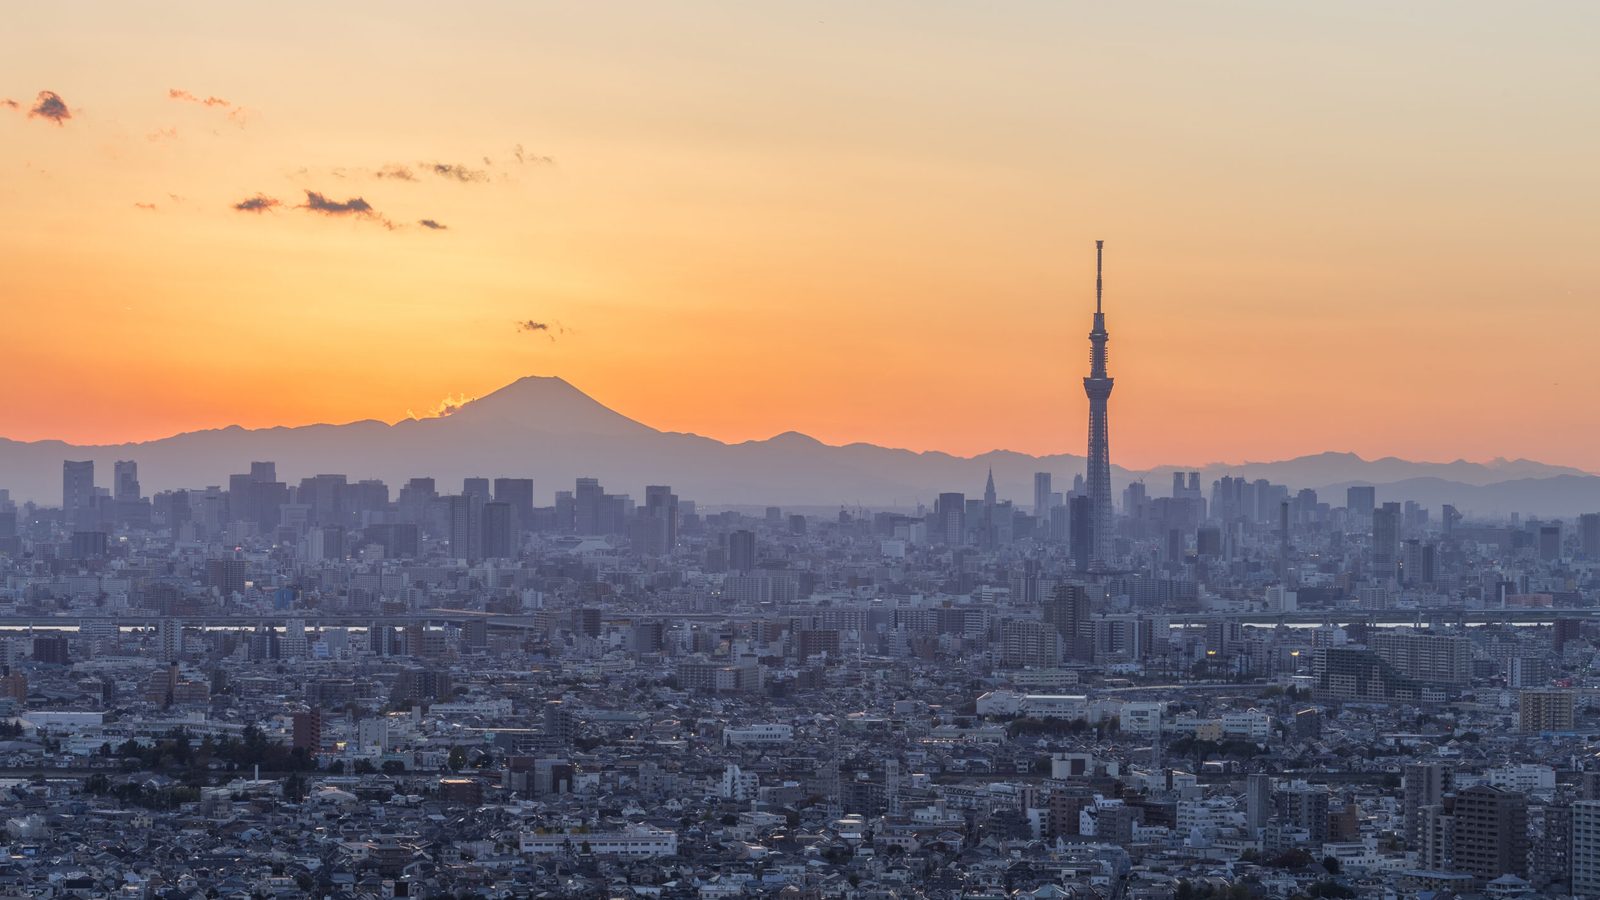 Japan part II: The sun is finally ready to rise again